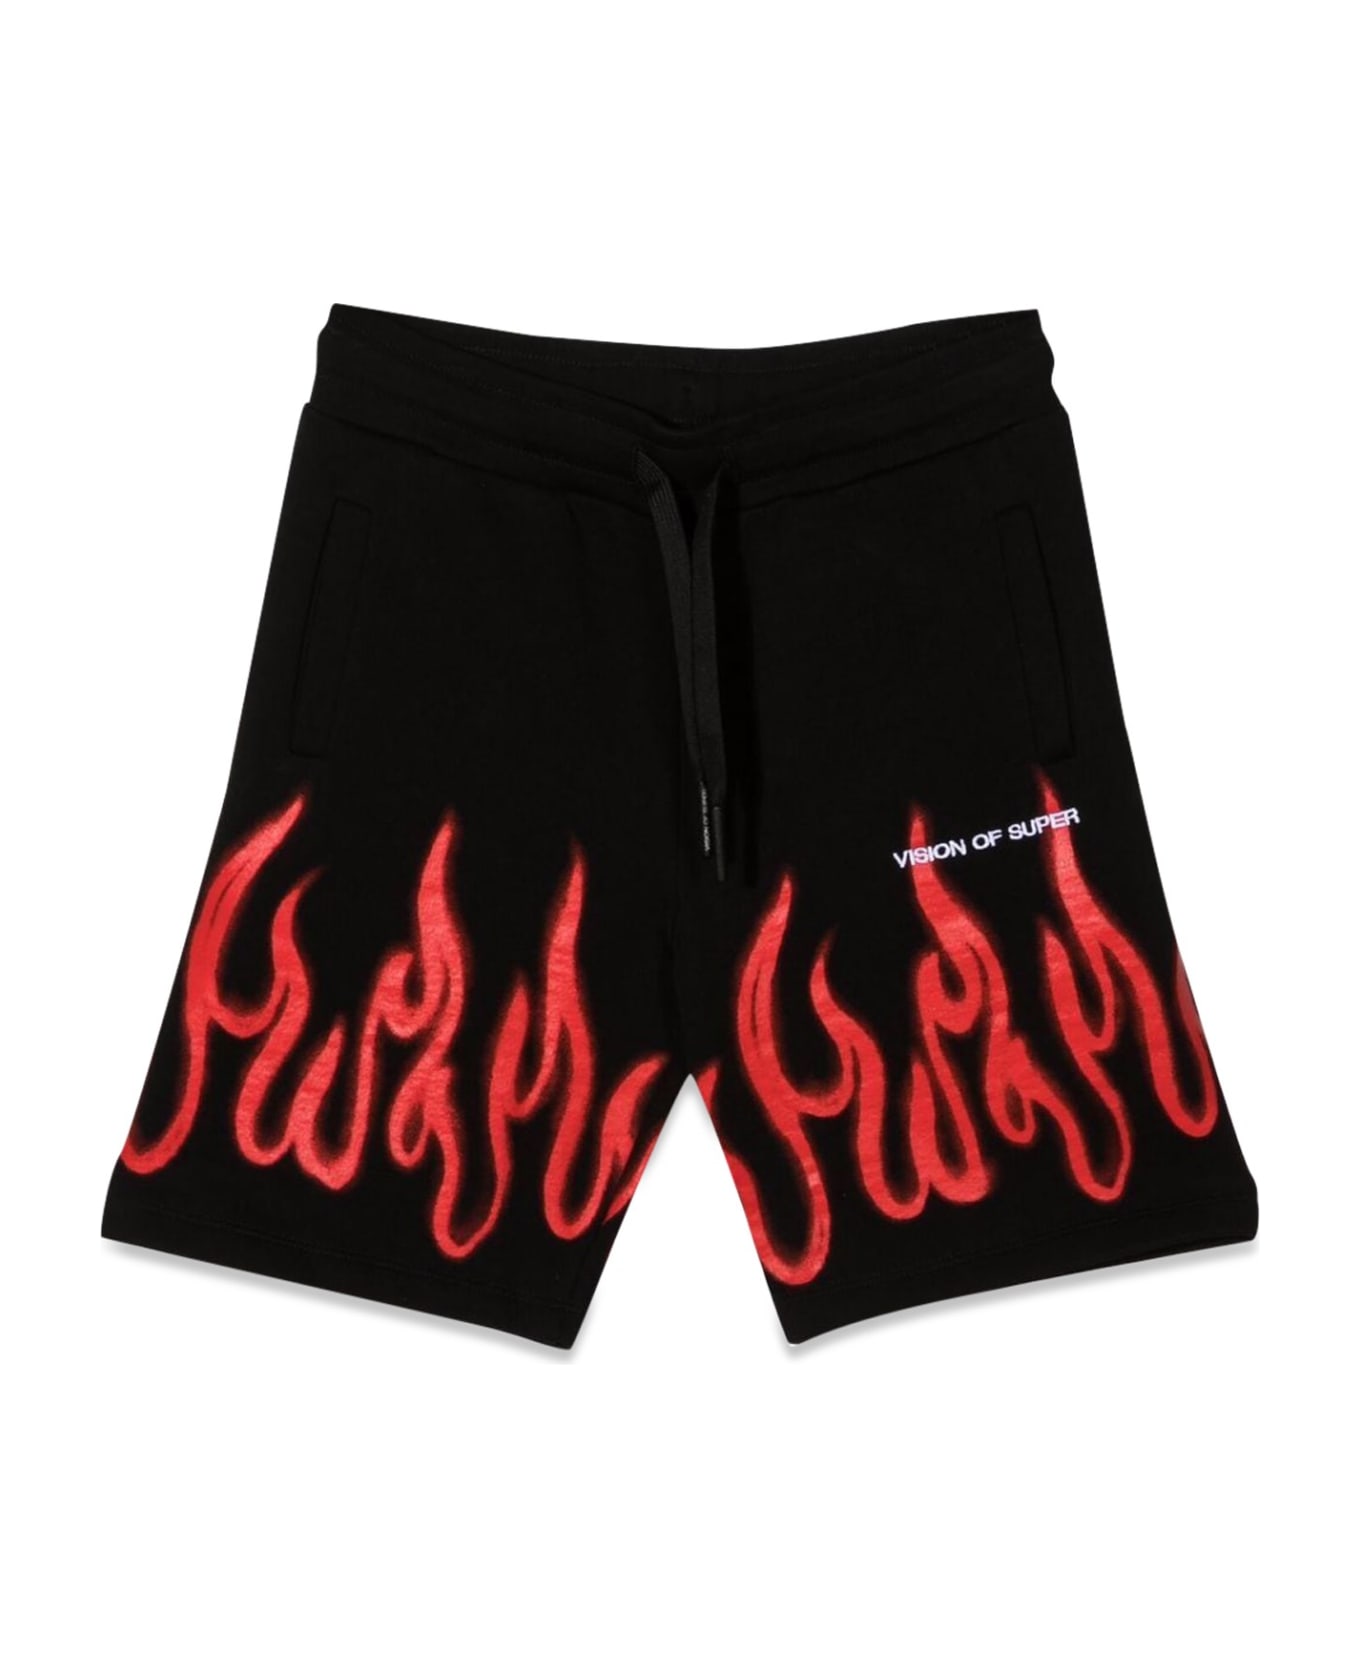 Vision of Super Black Shorts Kids With Red Spray Flames - NERO